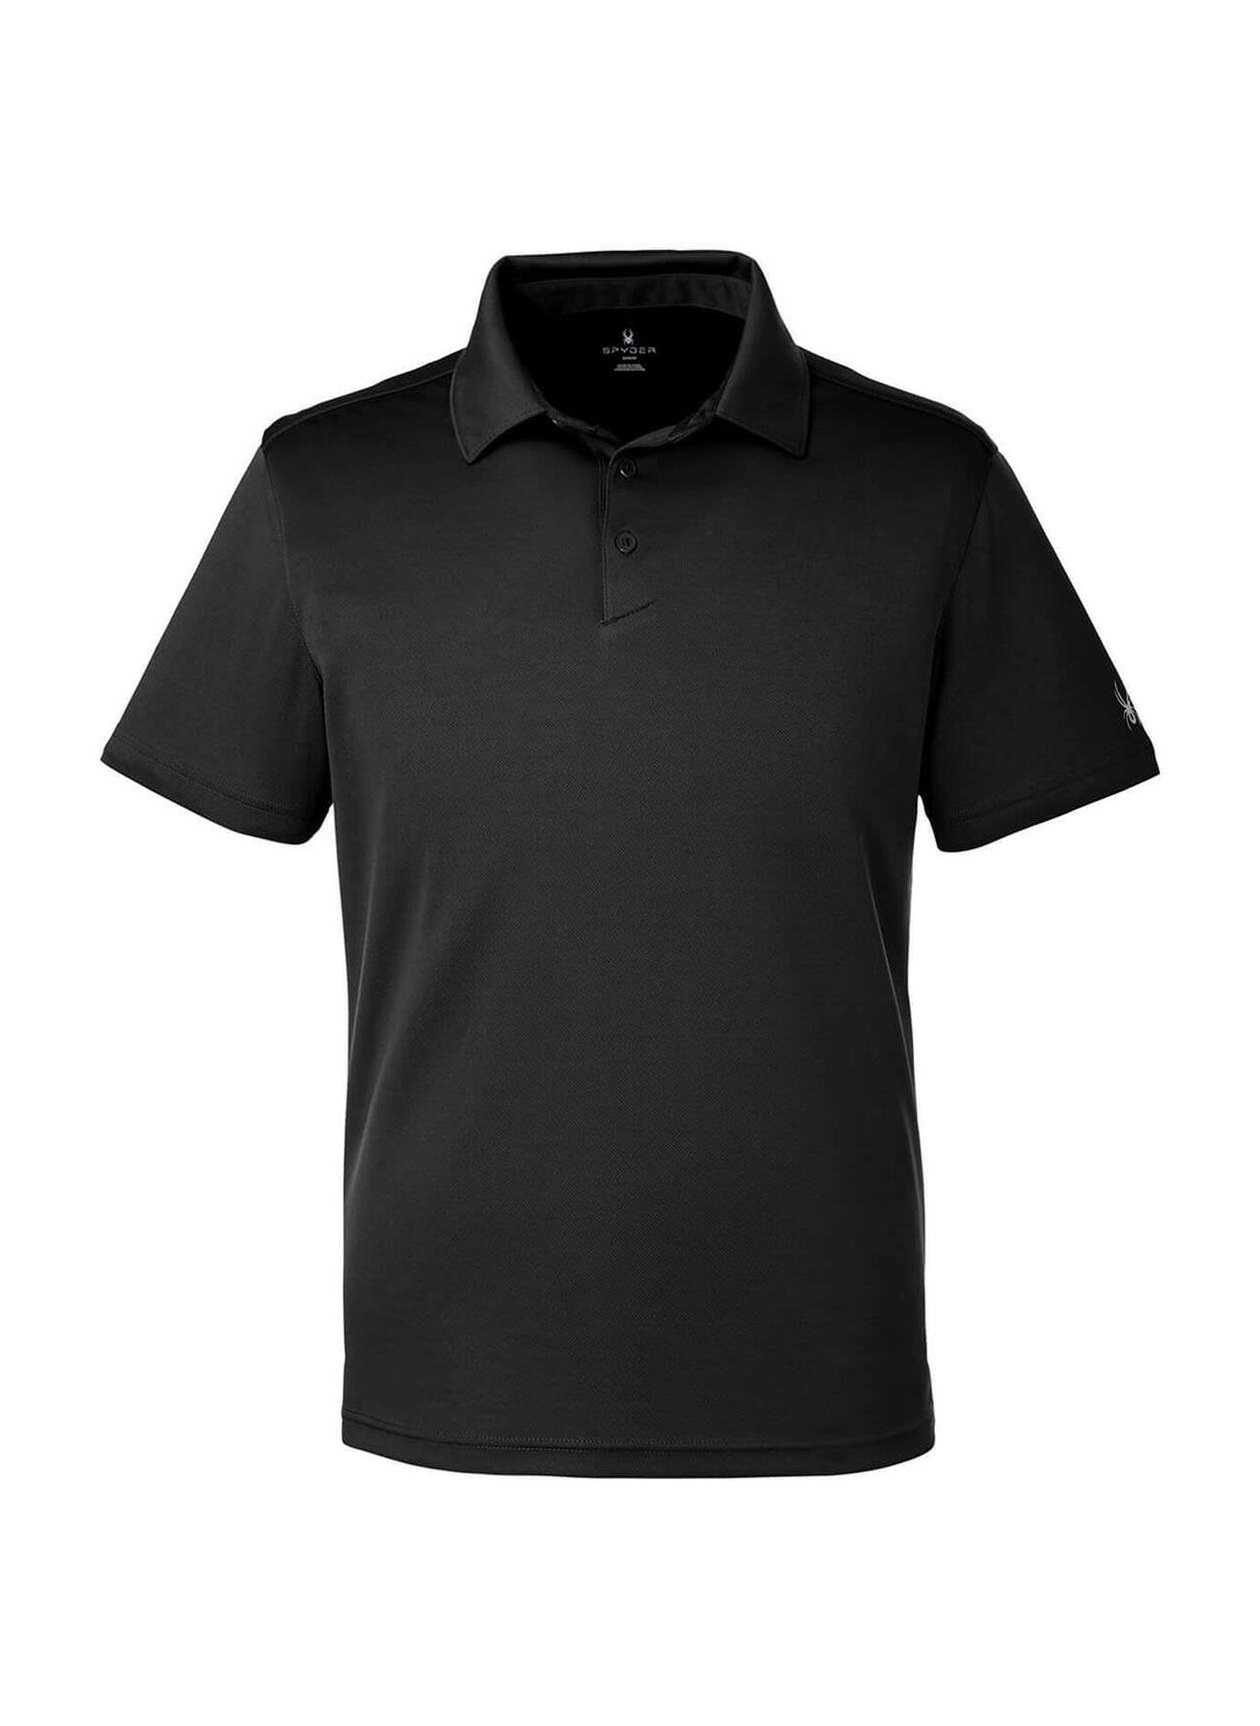 Embroidered Spyder Men's Black Freestyle Polo